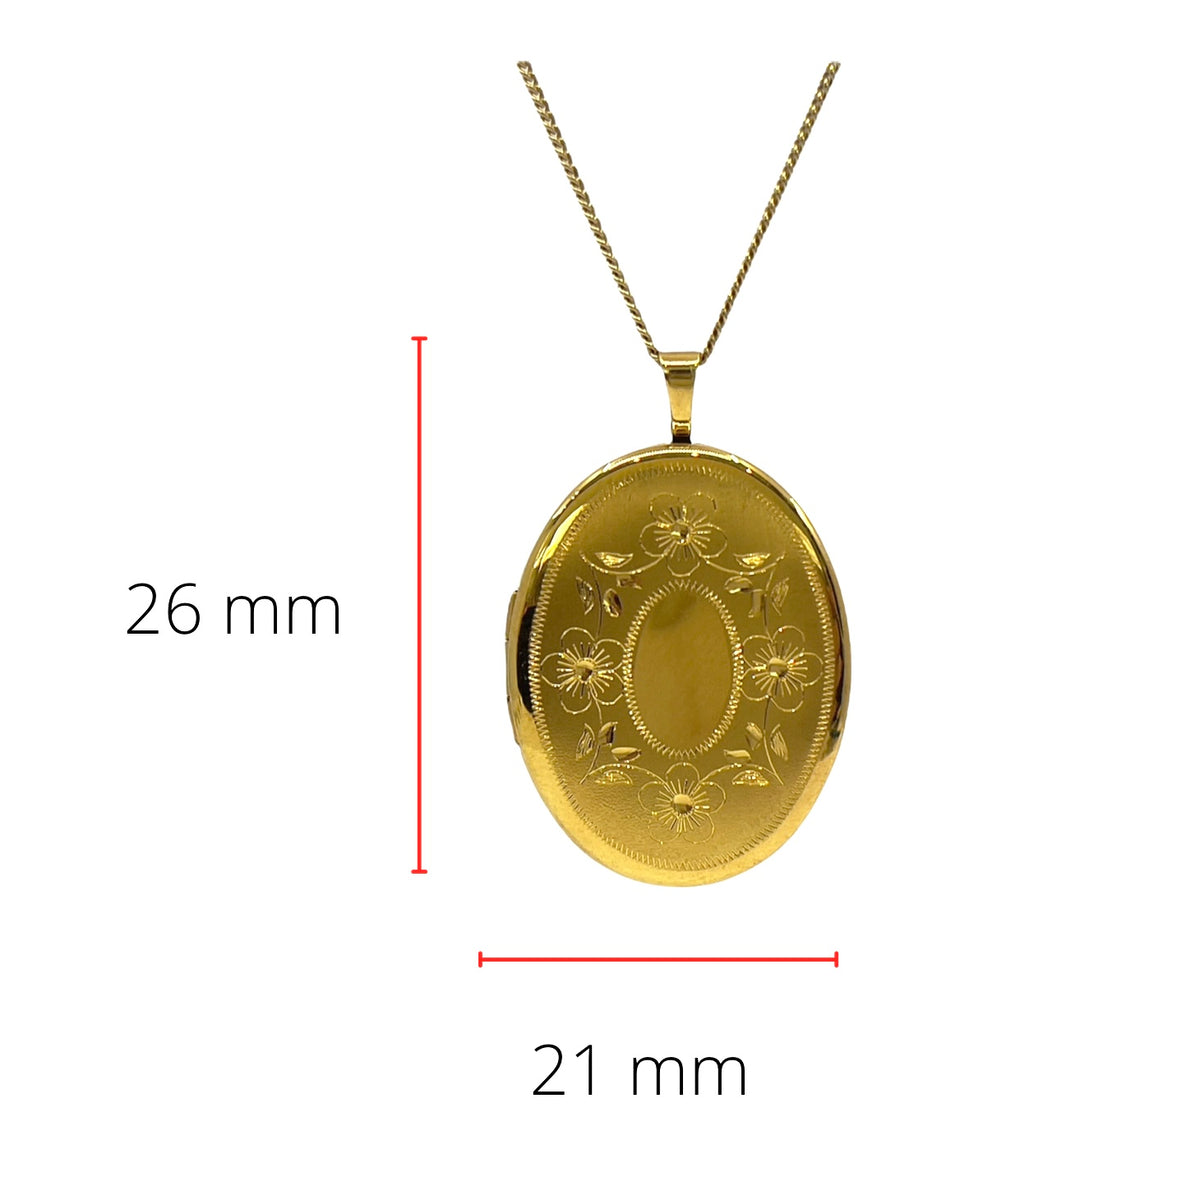 Gold Plated on 925 Sterling Silver Oval Shaped Locket with Filigree Design - 26mm x 21mm